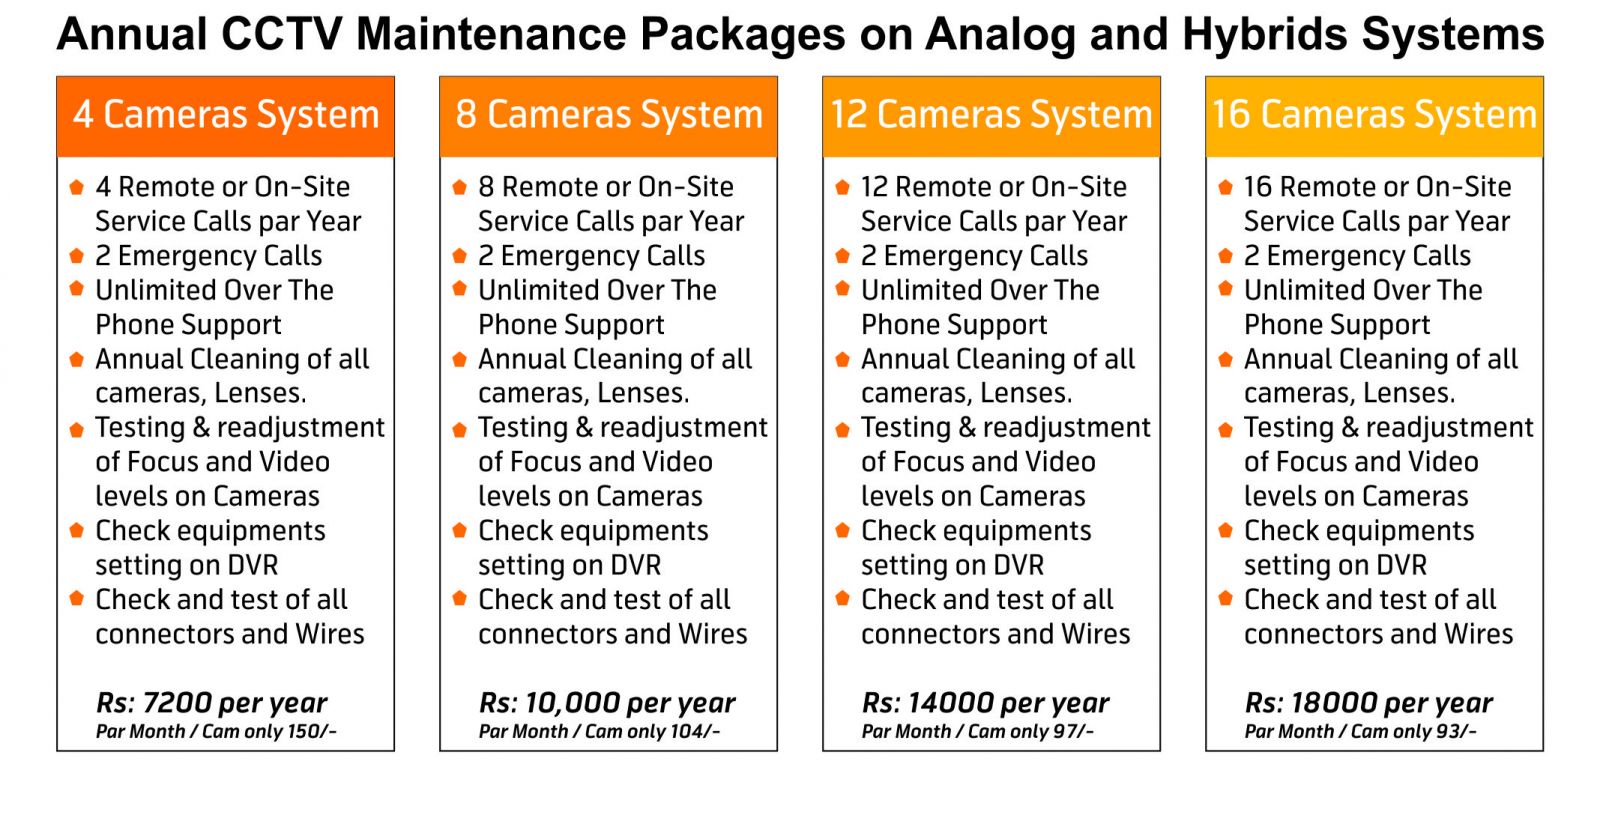 Cctv Annual Maintenance Services Contract Packages